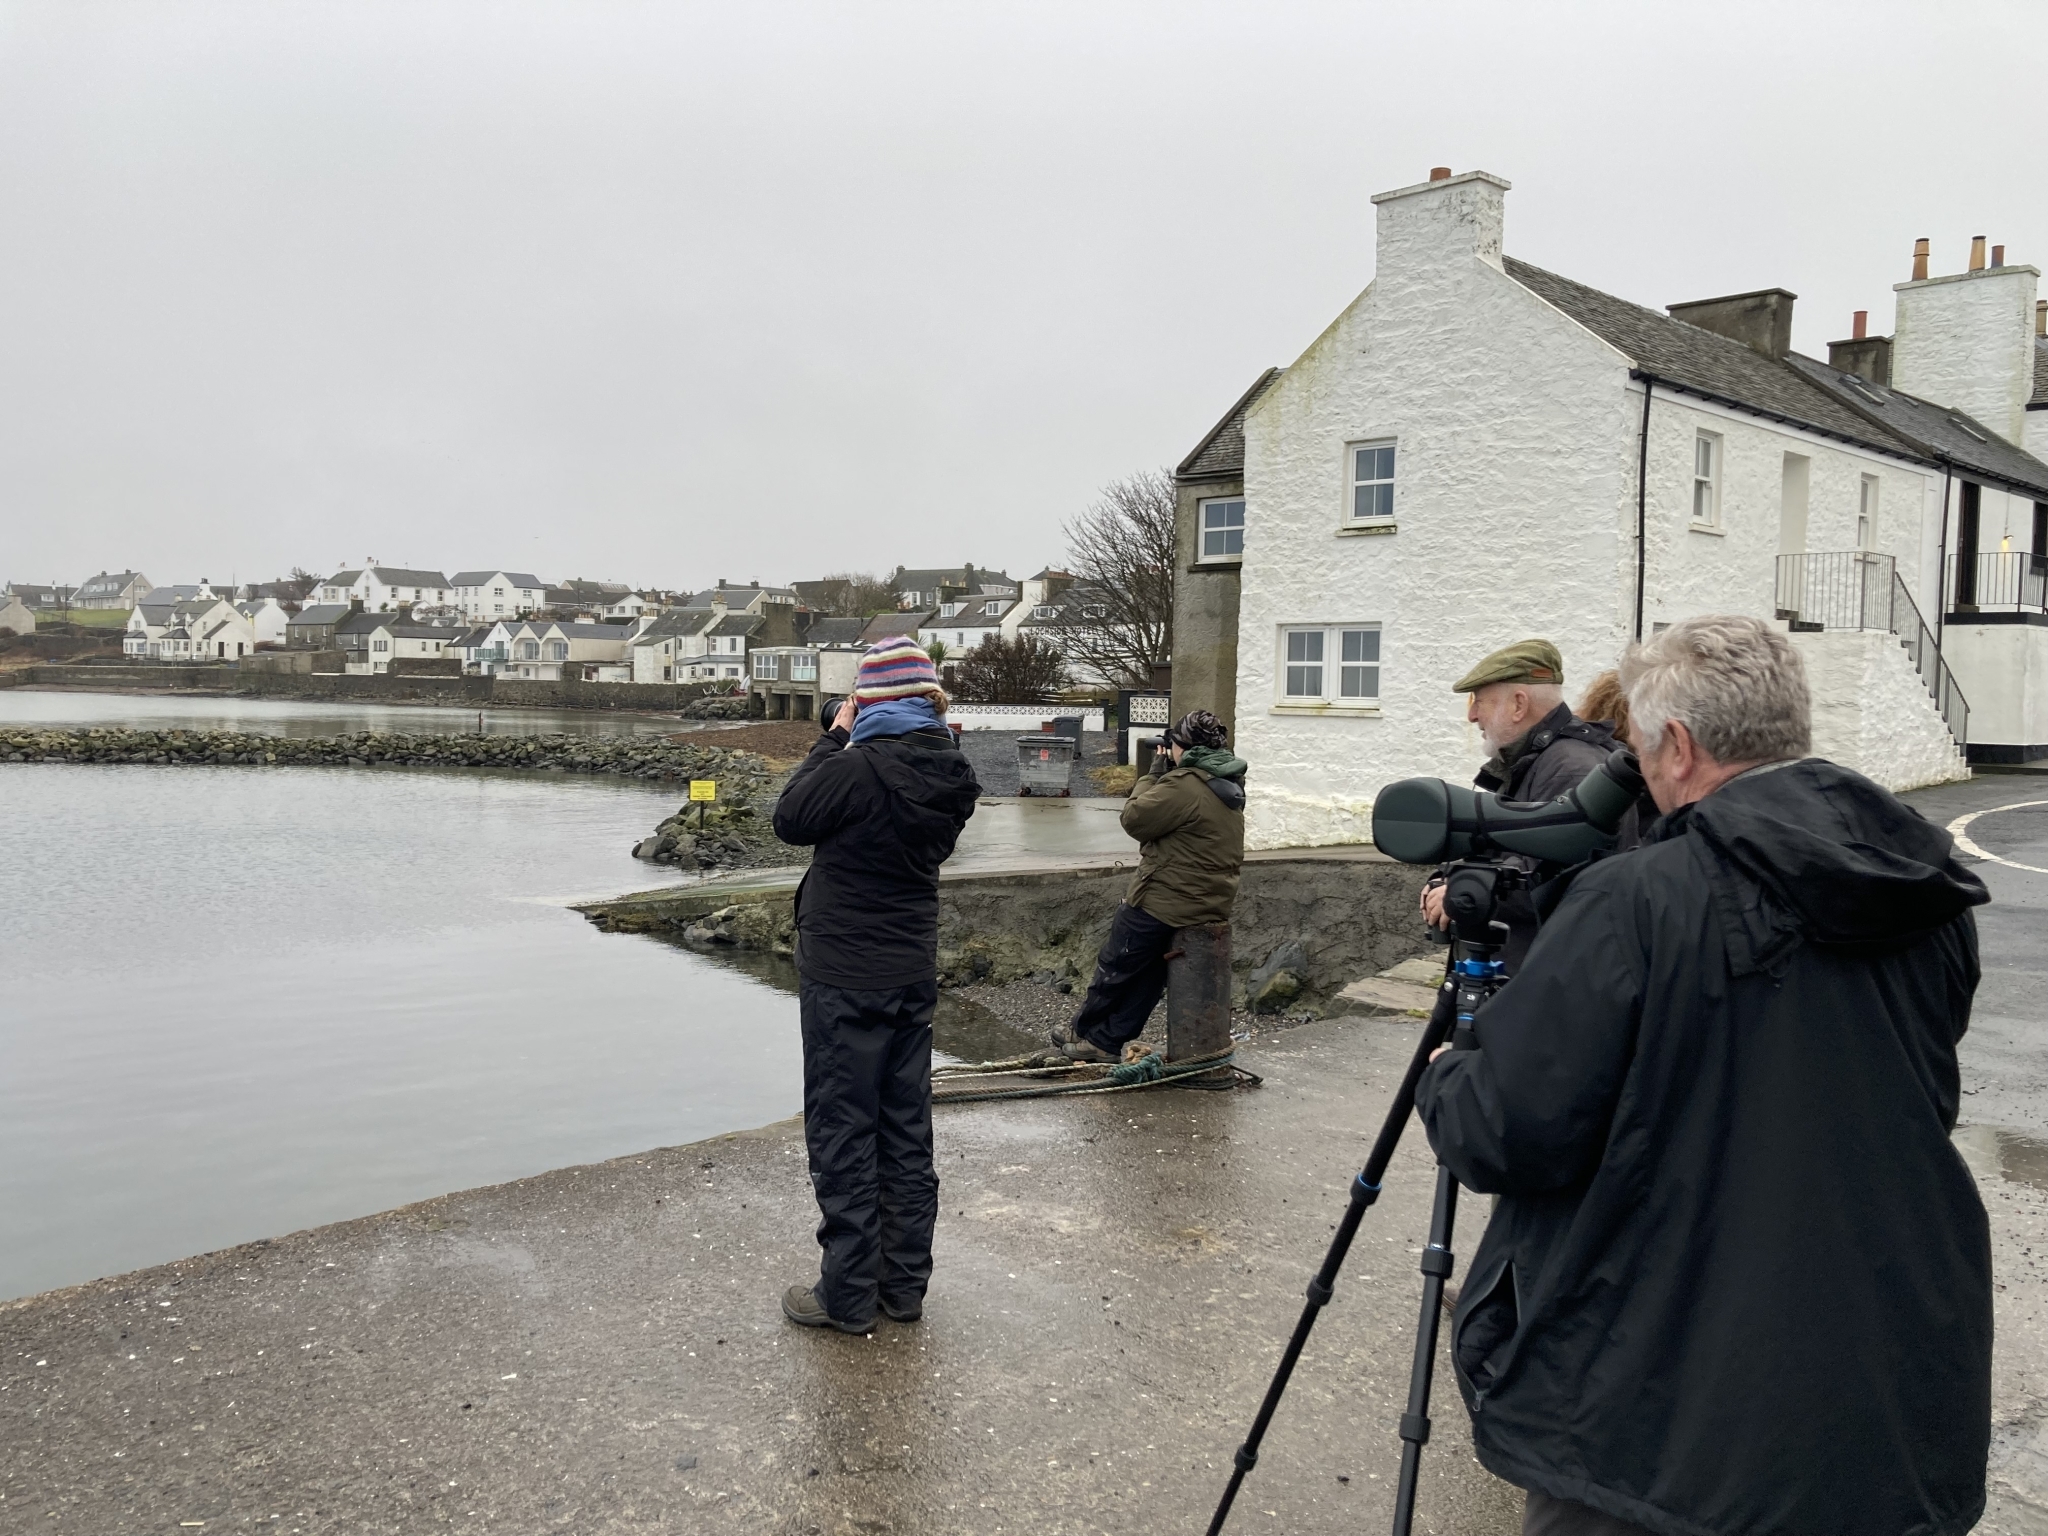 The group watching the kingfisher in Bowmore Harbour